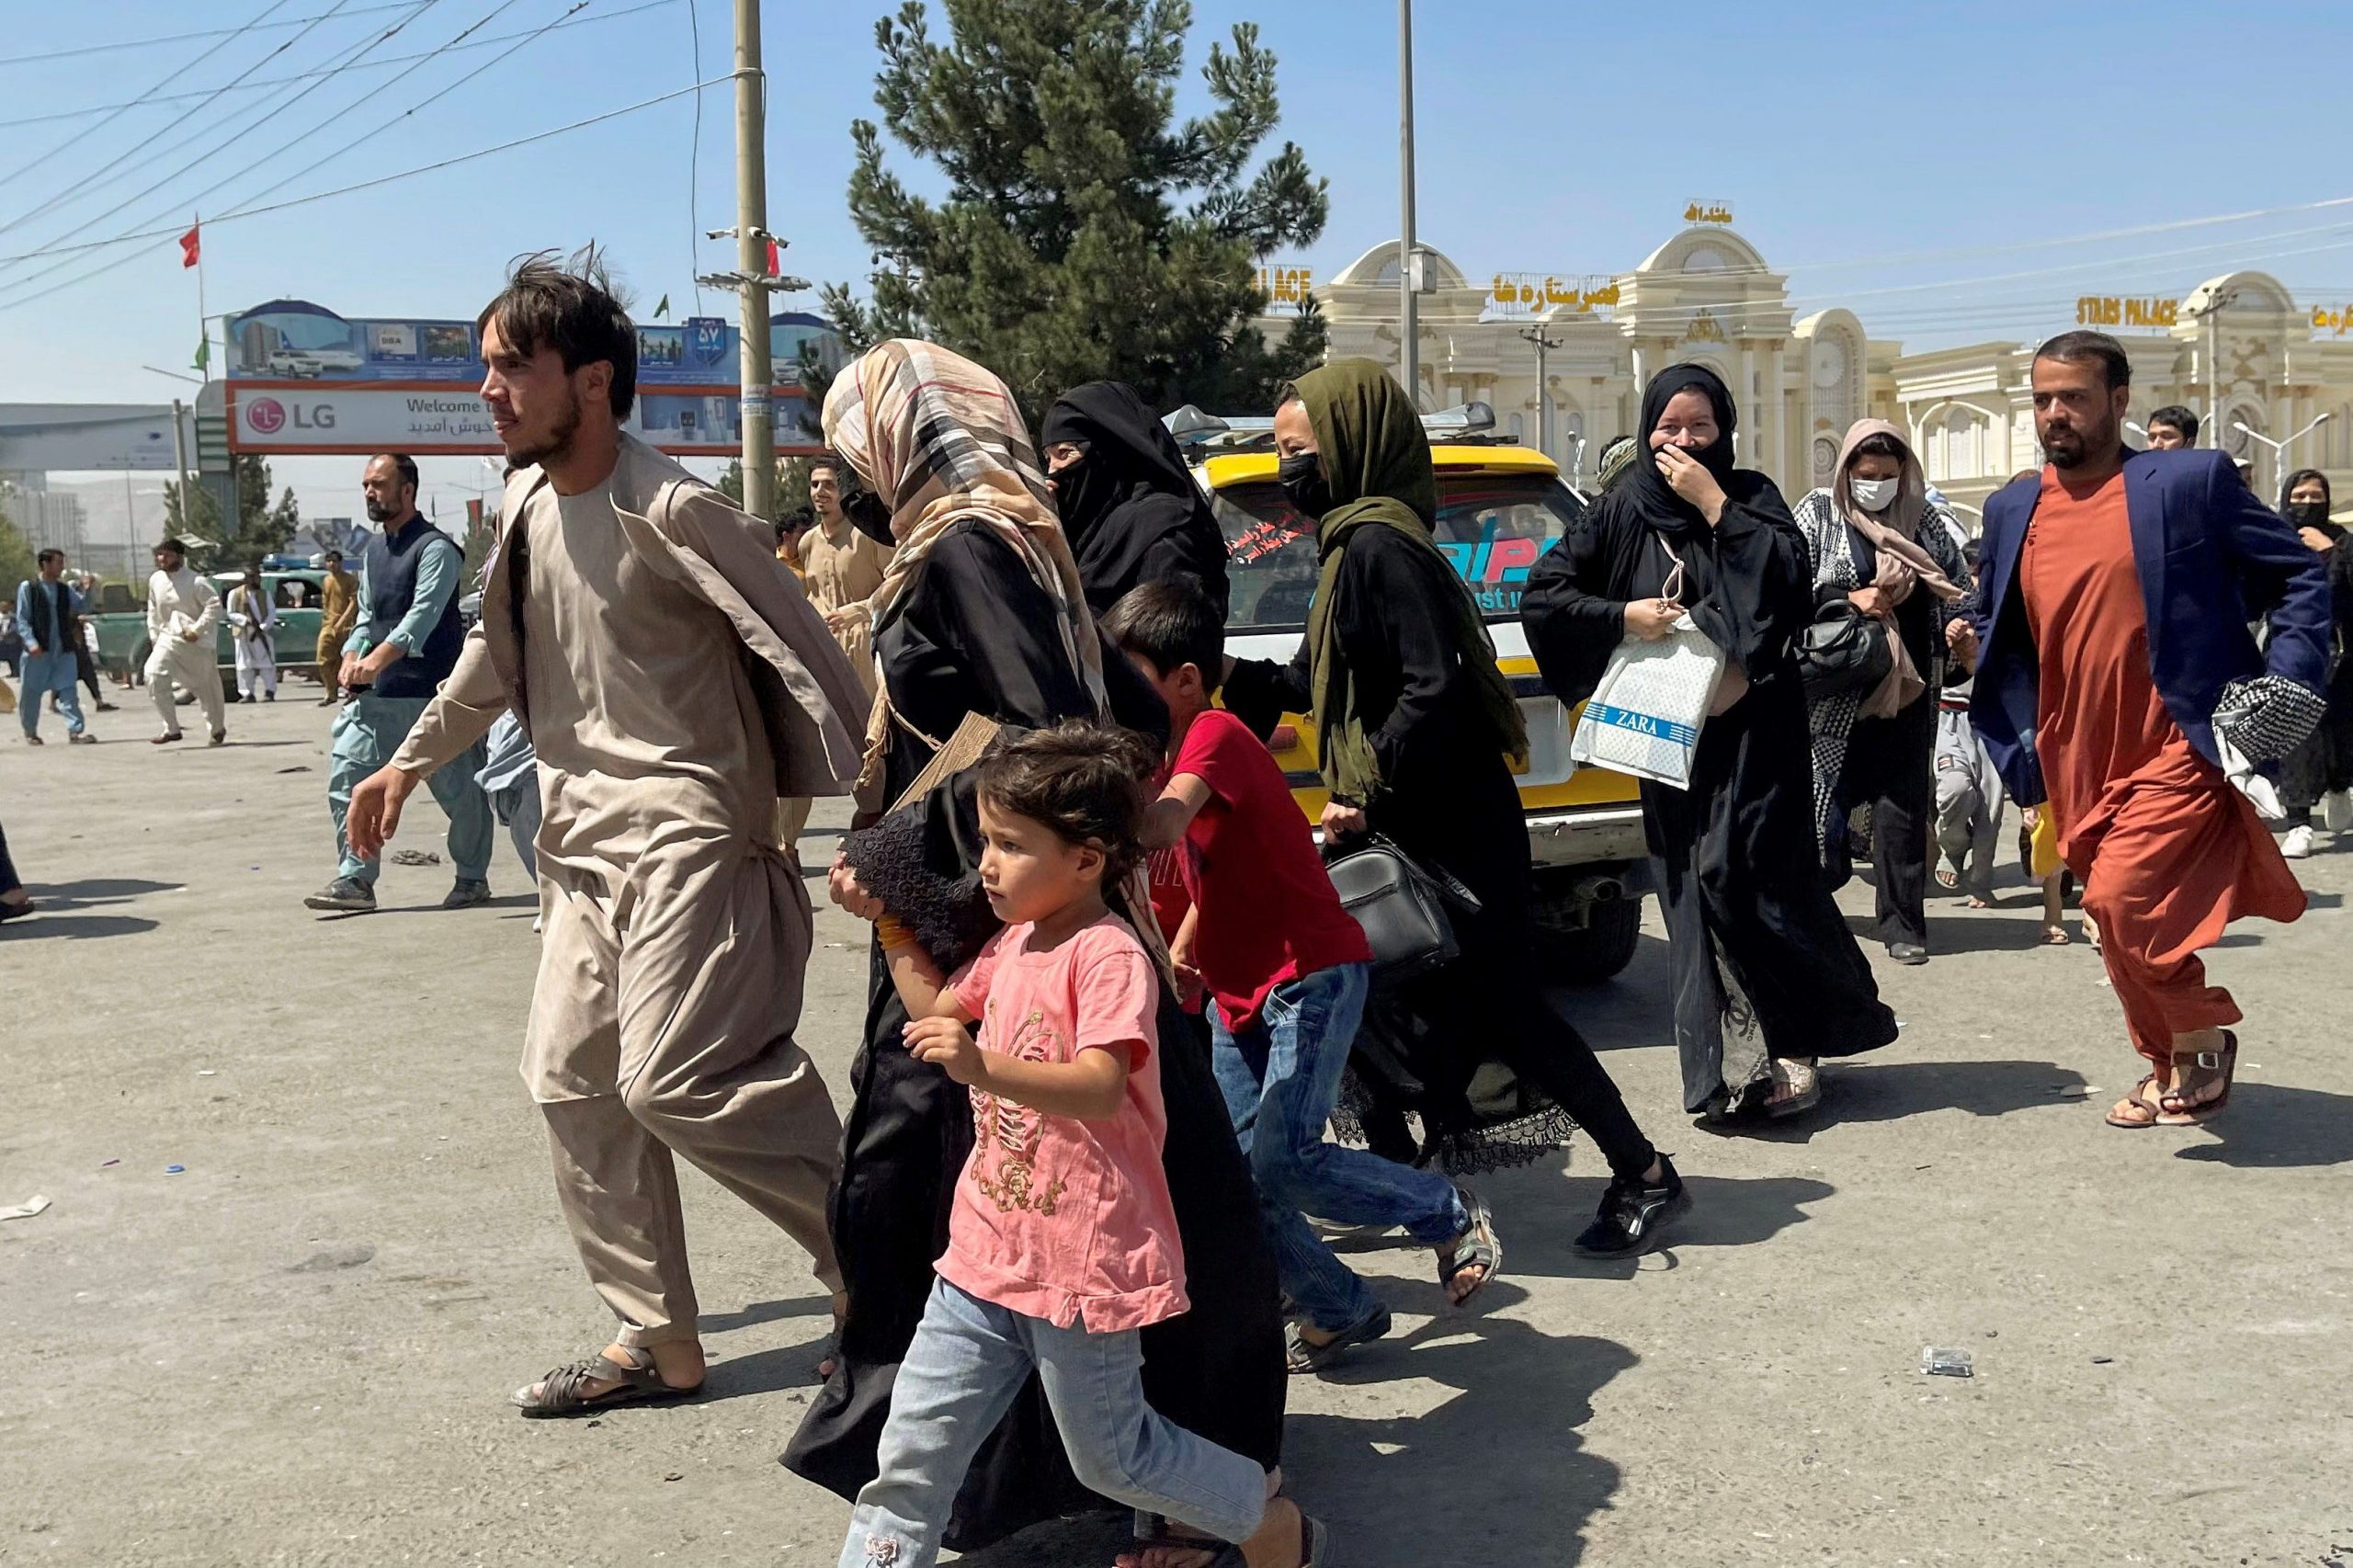 A dozen Afghan people are running, one woman is holding the hand of a child.